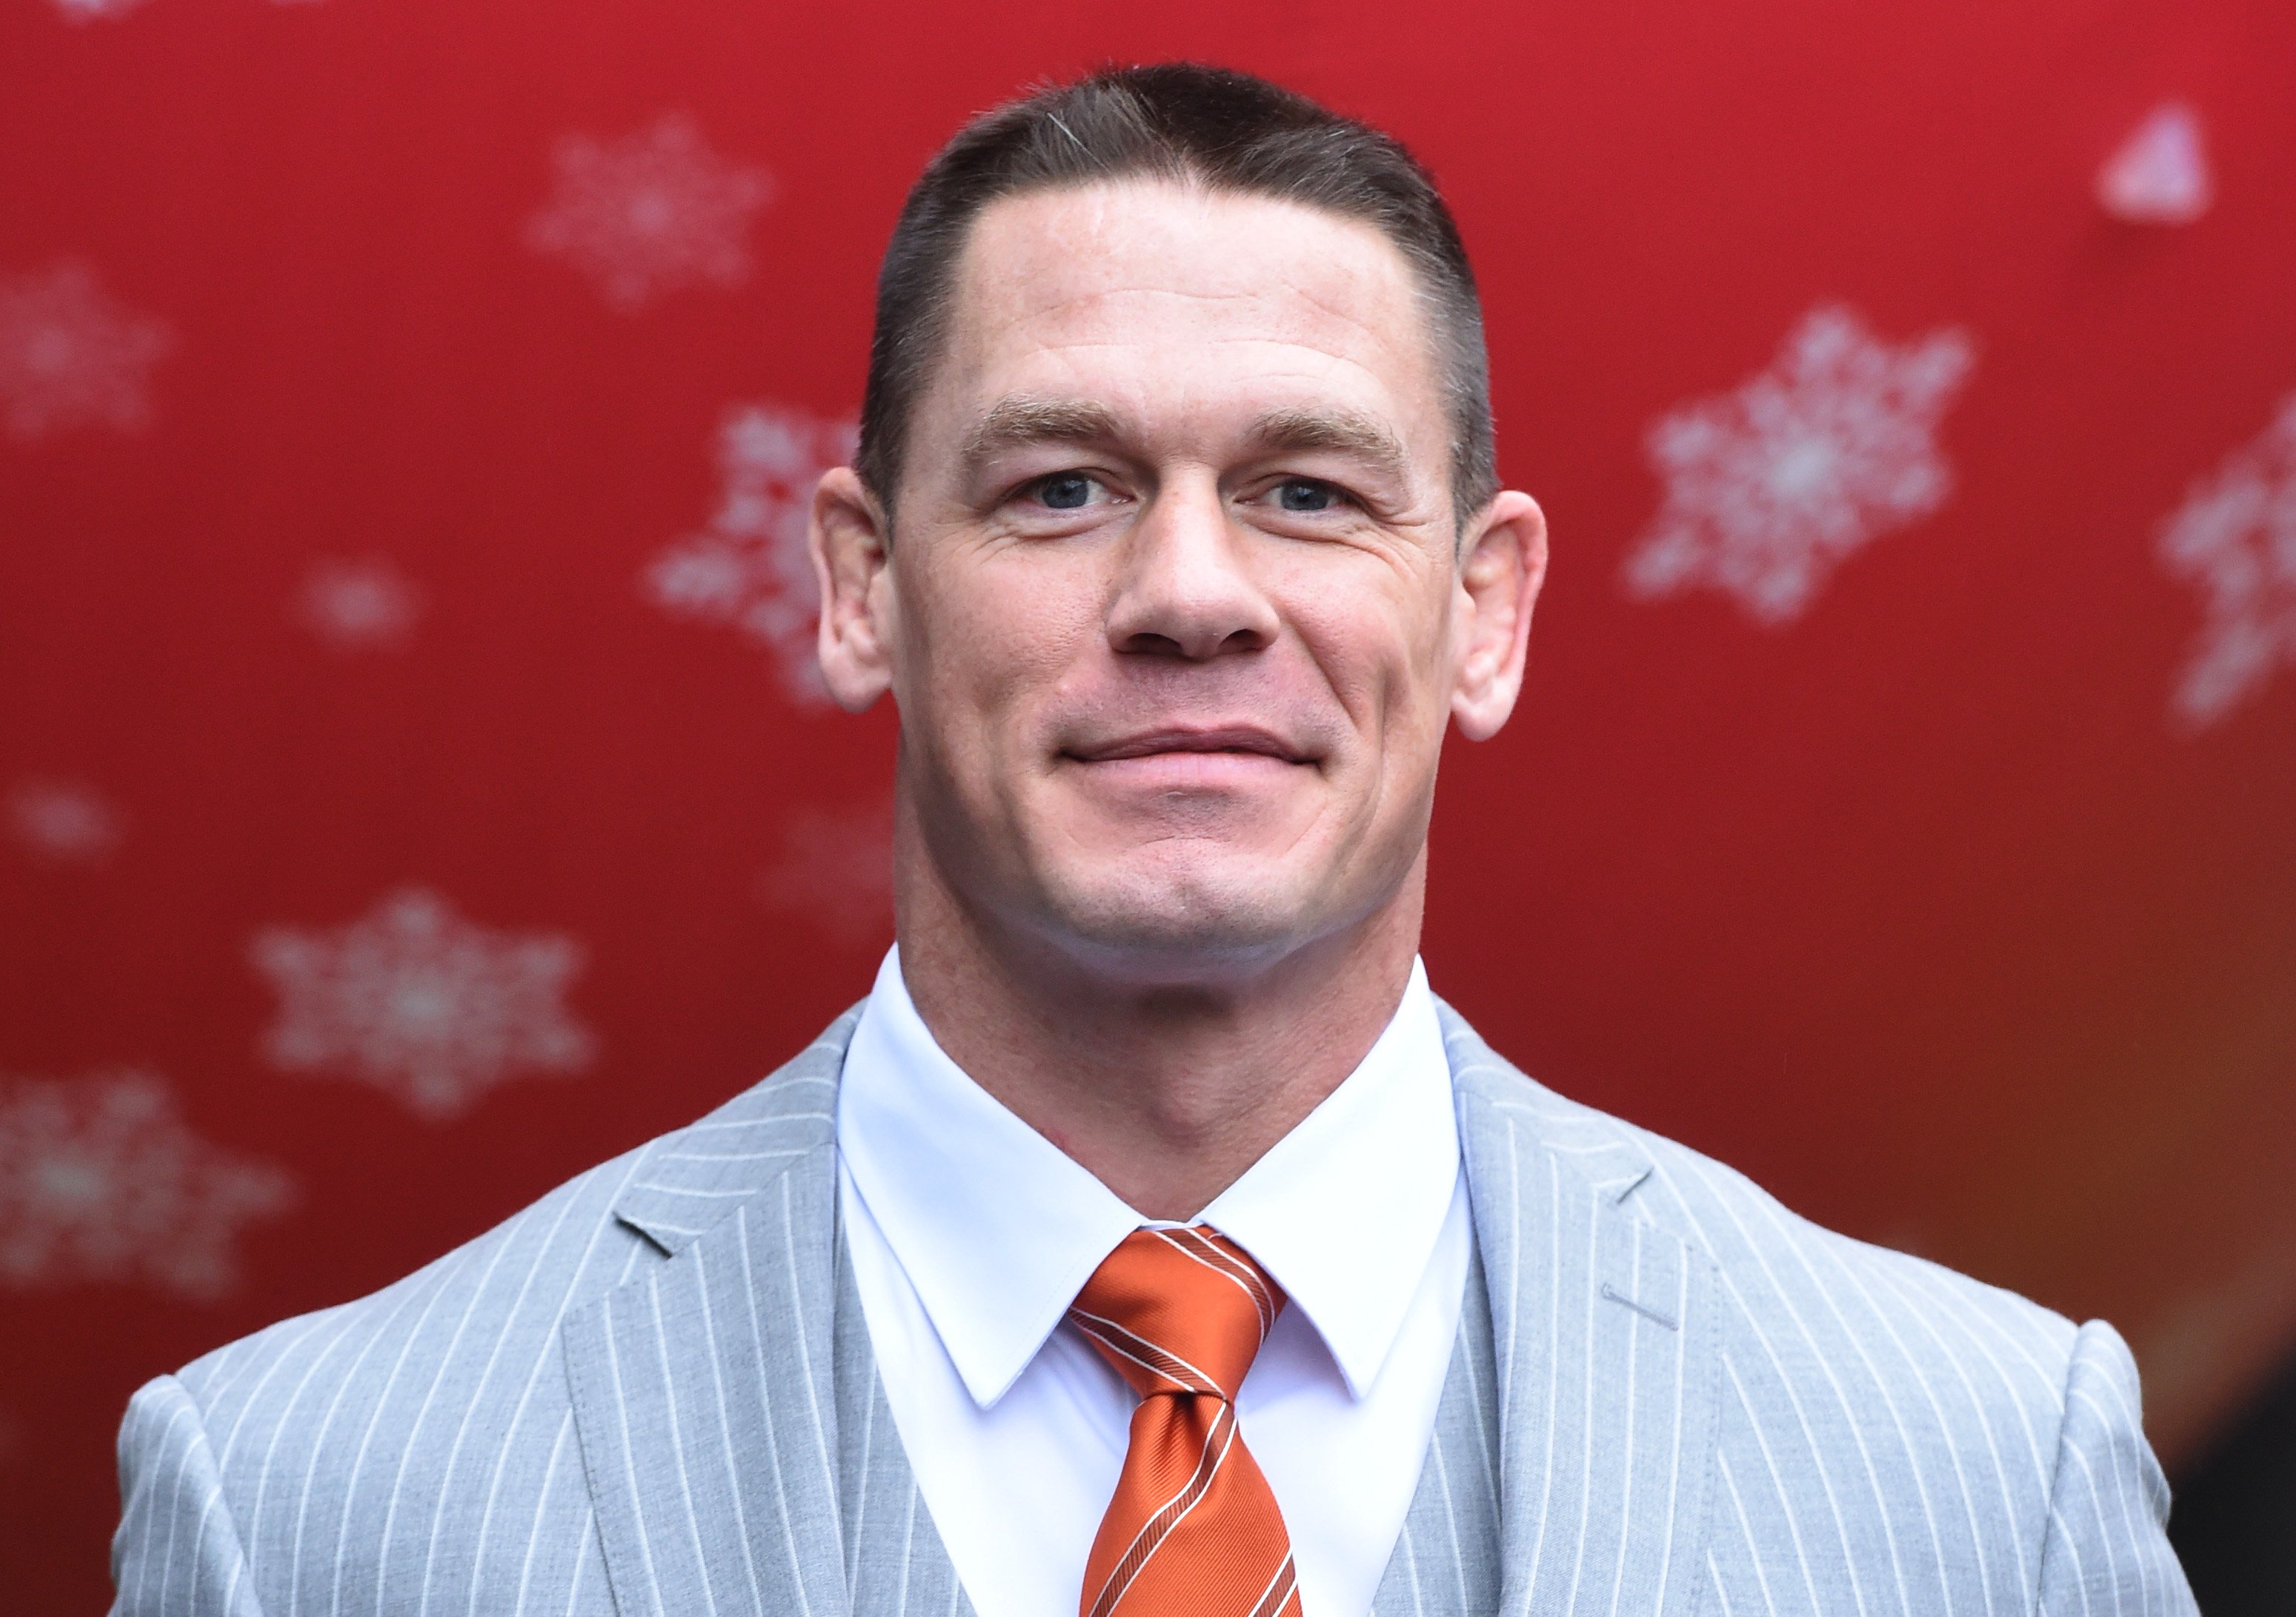 John Cena attends the 'Ferdinand' special screening at BFI Southbank on December 3, 2017, in London, England. | Source: Getty Images.